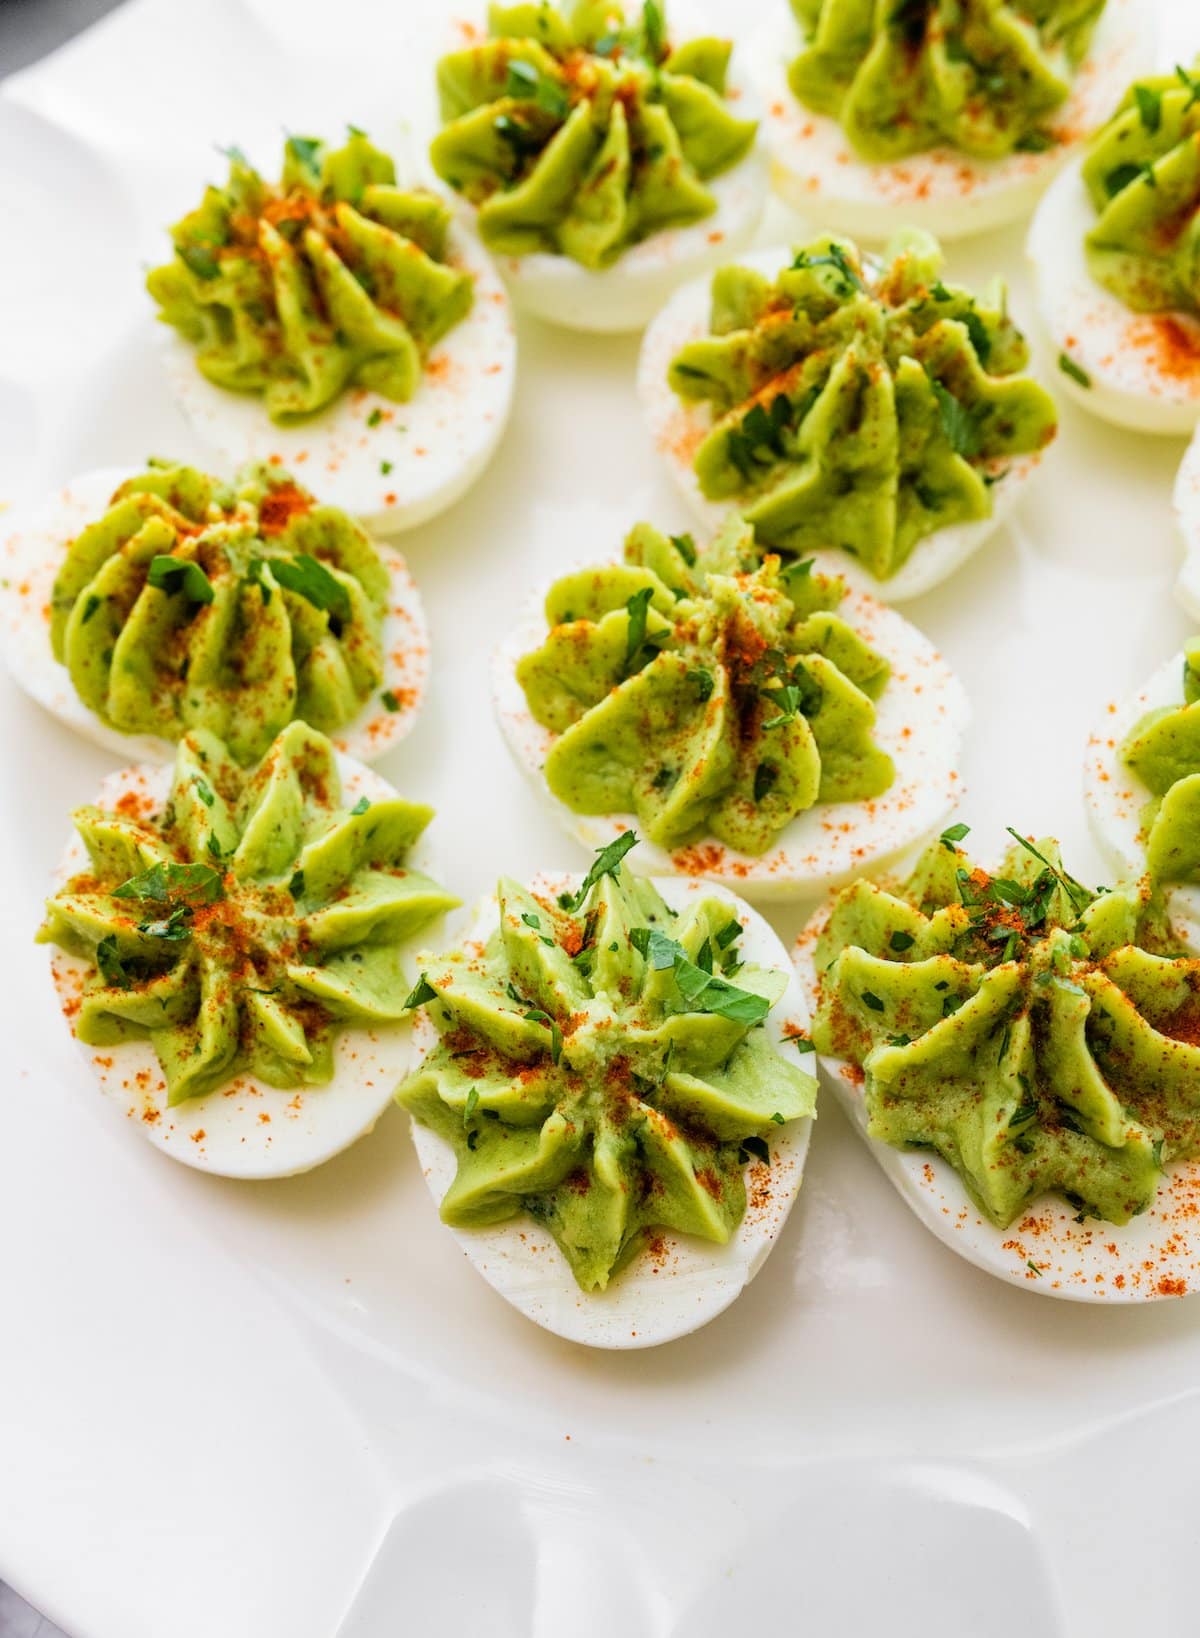 Avocado deviled eggs near one another on a plate and topped with a dash of paprika and fresh herbs.